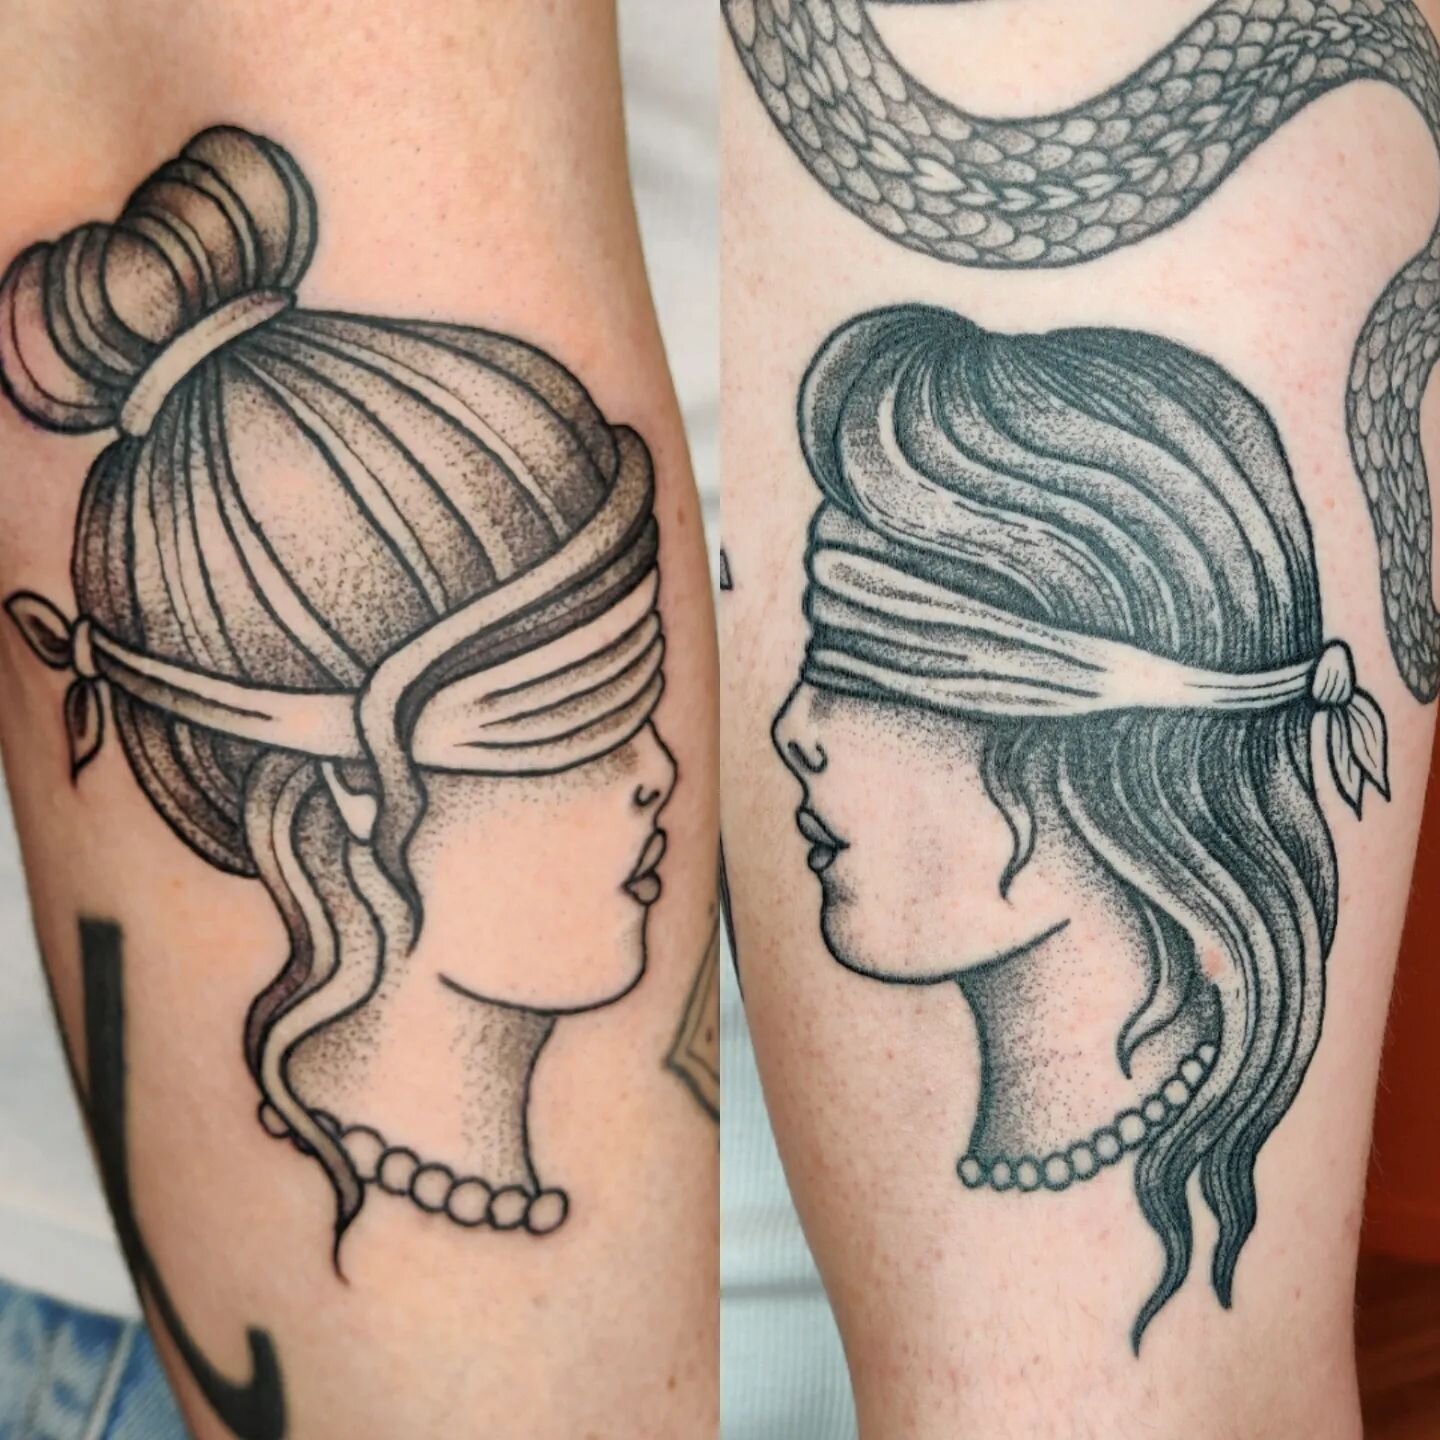 Ive been working with Christian on adding some more dotwork traditional style tattoos to his arms. On the left we have a fresh blindfolded lady, and on the right a healed one. Swipe to see the dagger i made for him, aswell as the healed bird on a bra